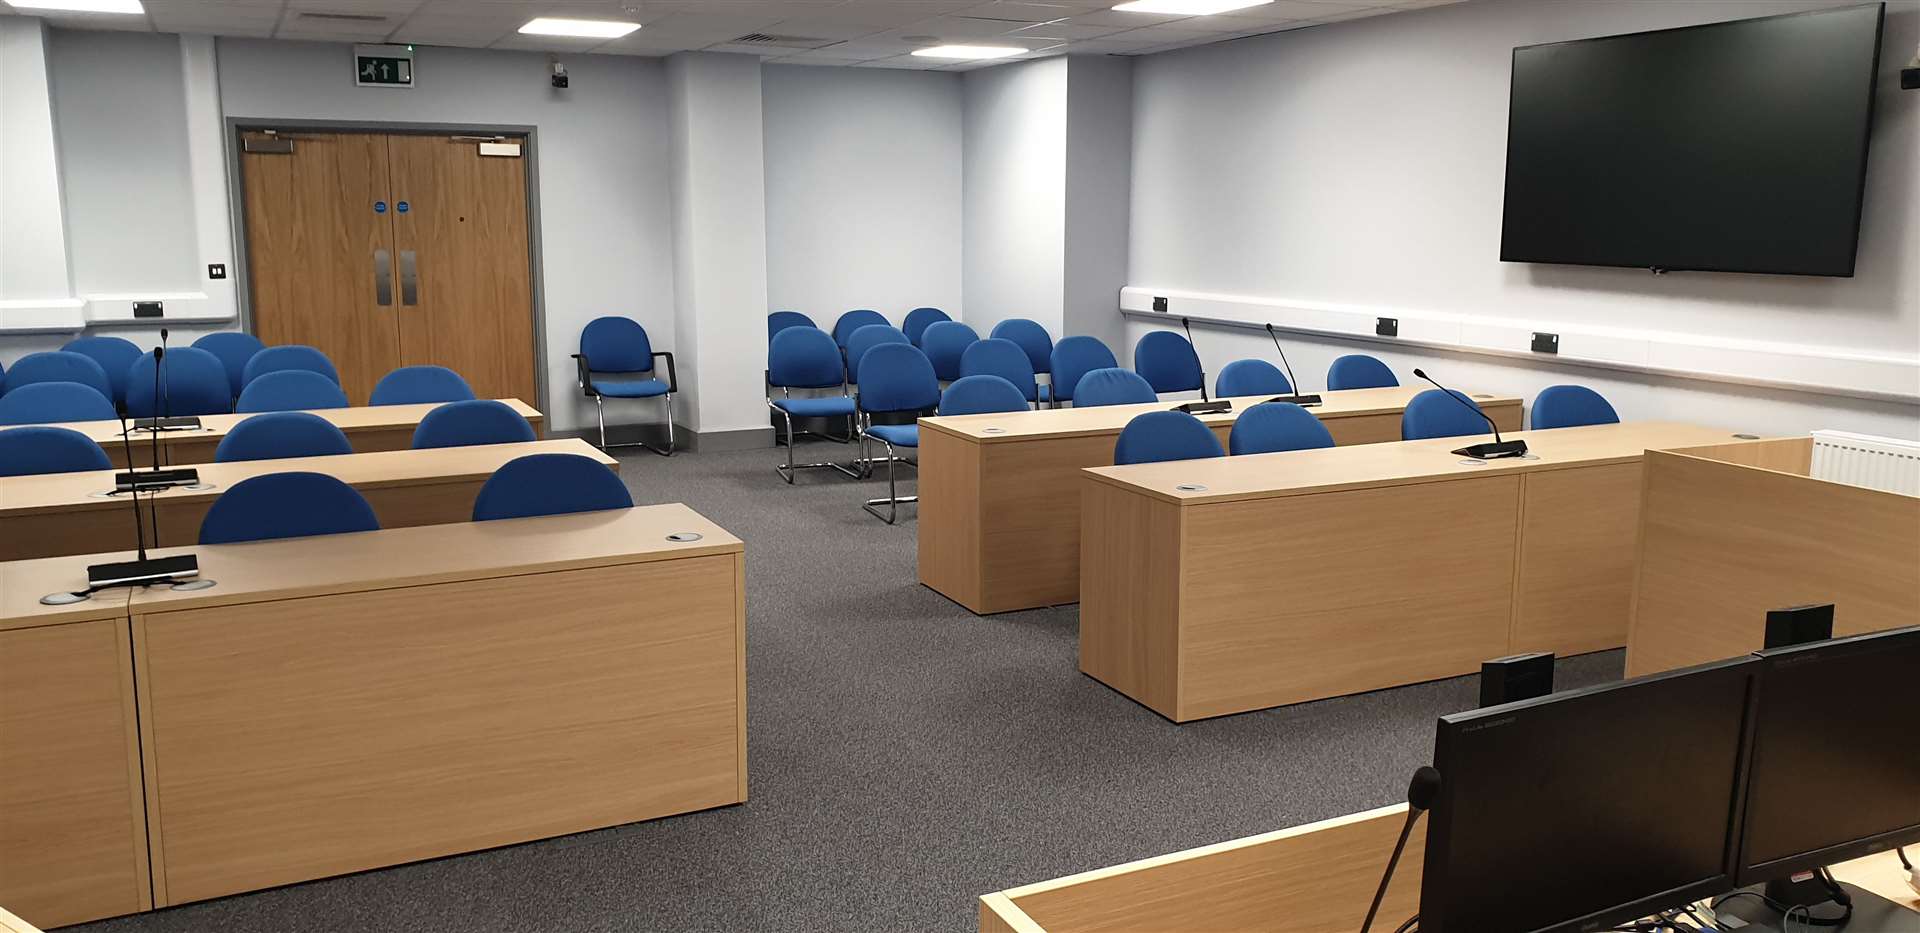 One of the new coroner's courts at Oakwood House